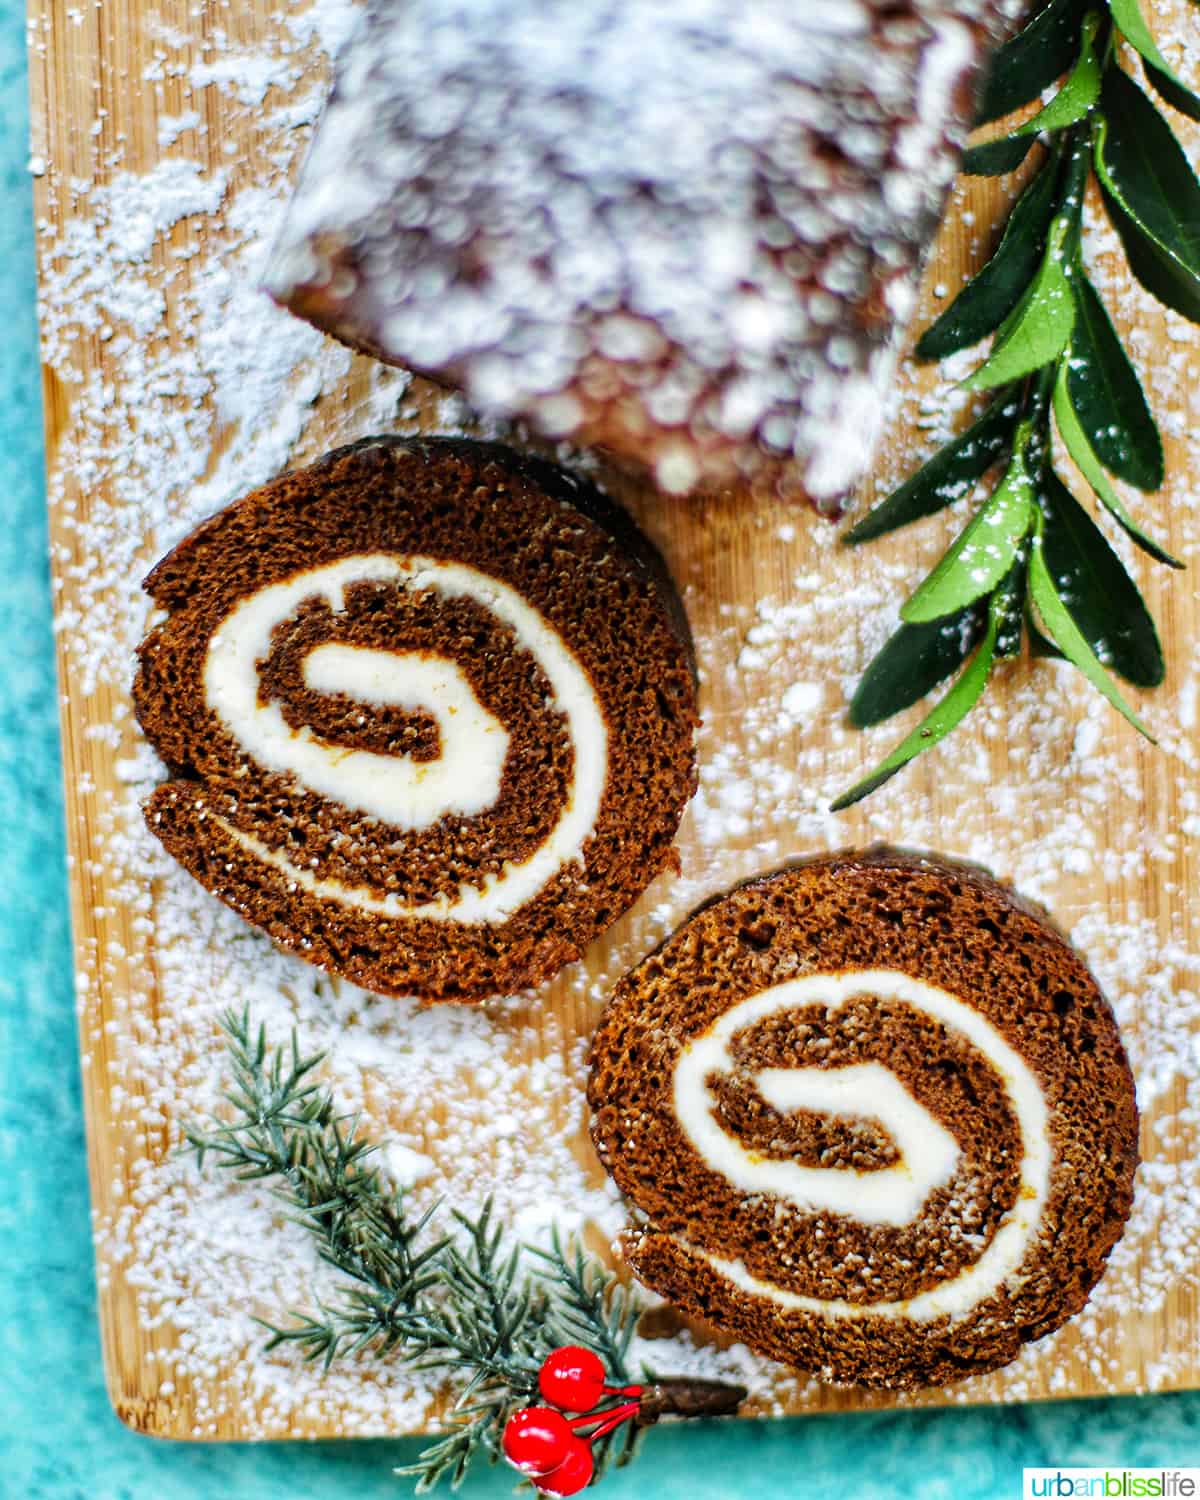 two big slices of Gingerbread cake roll with holiday trimmings, cream cheese filling, and Christmas decorations.